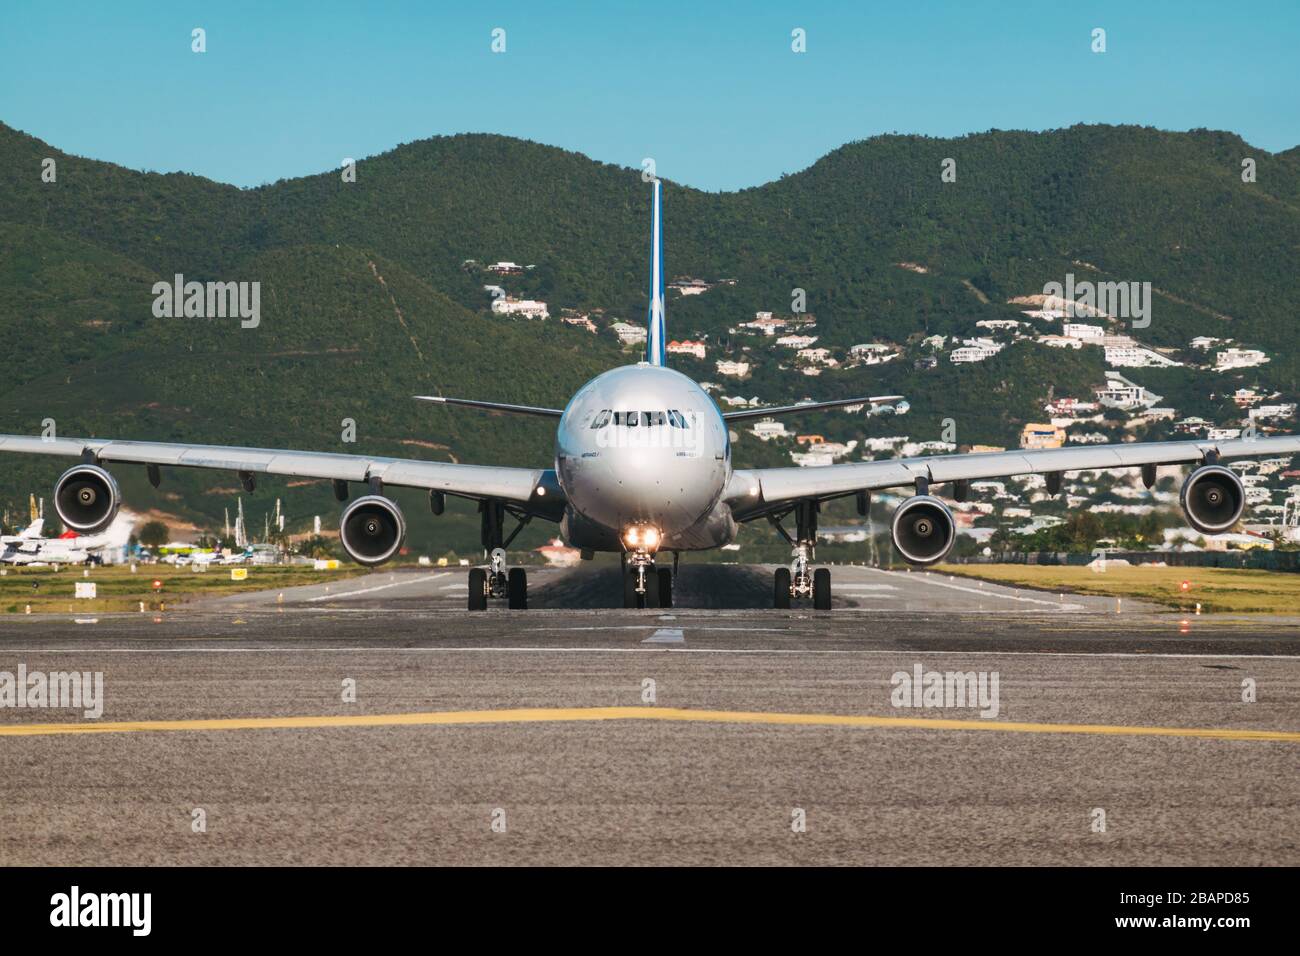 An Airbus A340-300 operated by Air France, in the now-defunct subsidiary Joon's branding. Lining up for takeoff at St. Maarten Stock Photo